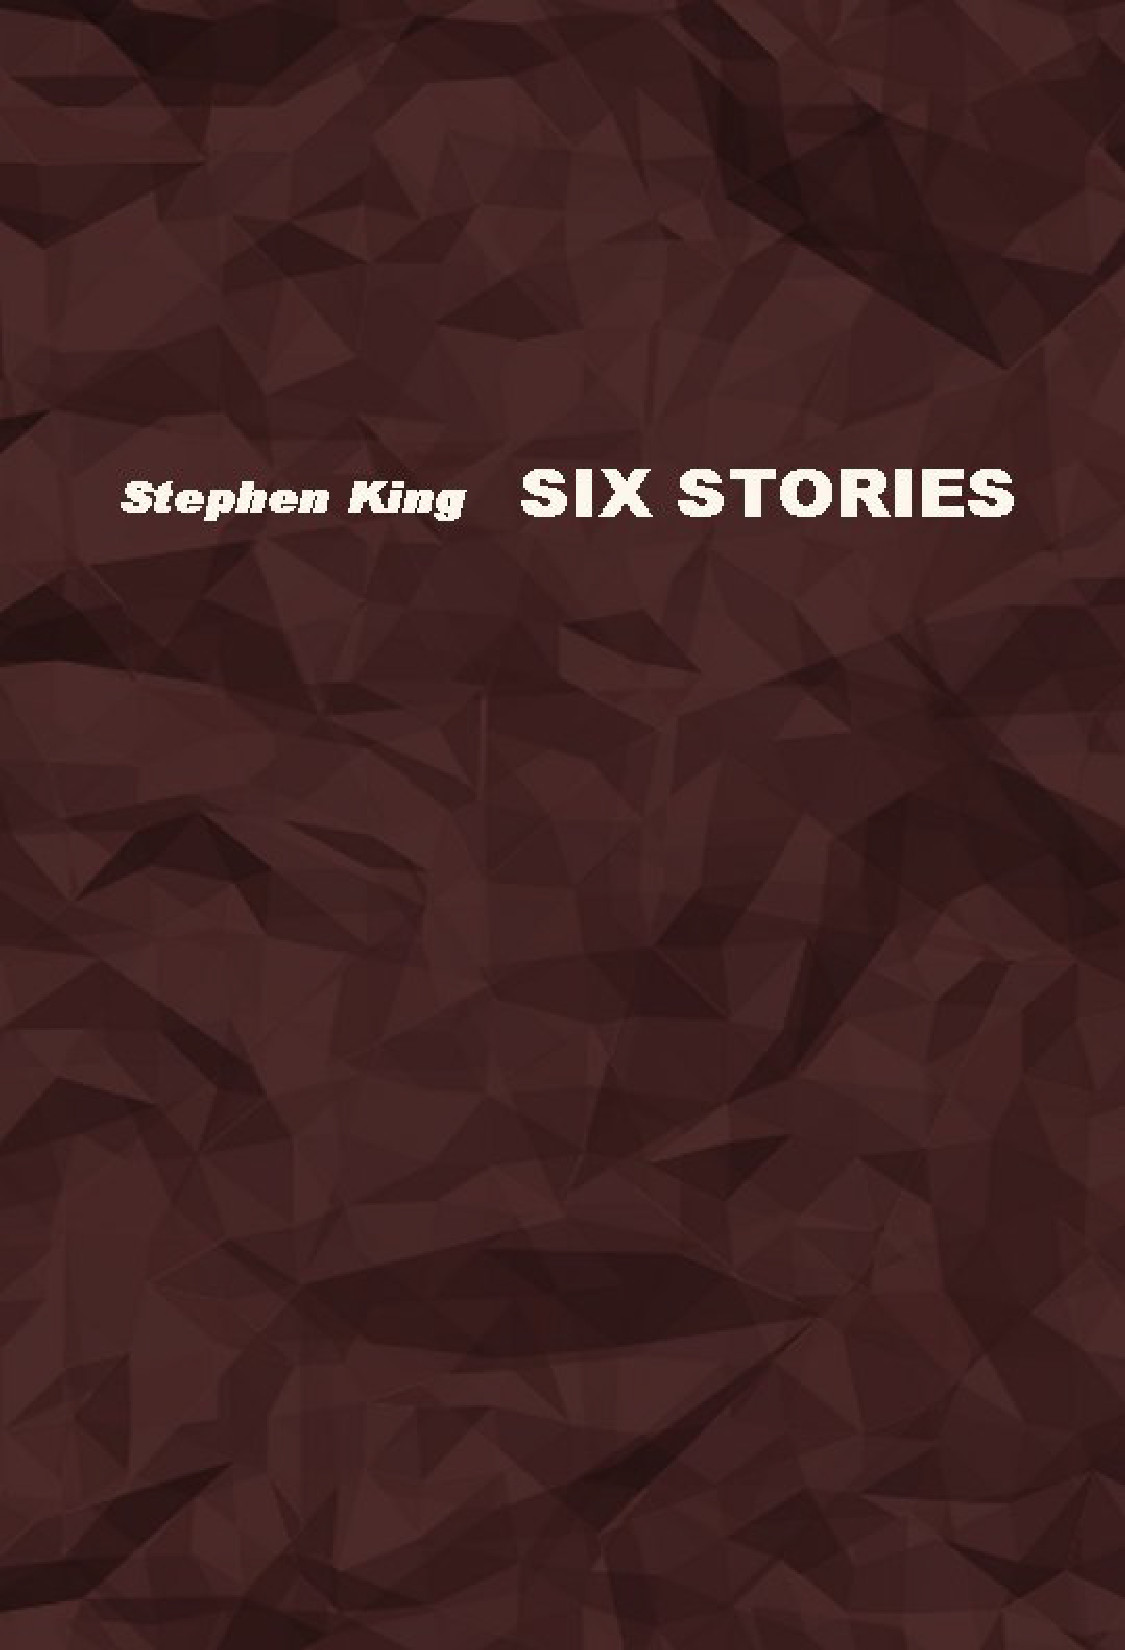 Six Stories by Stephen King